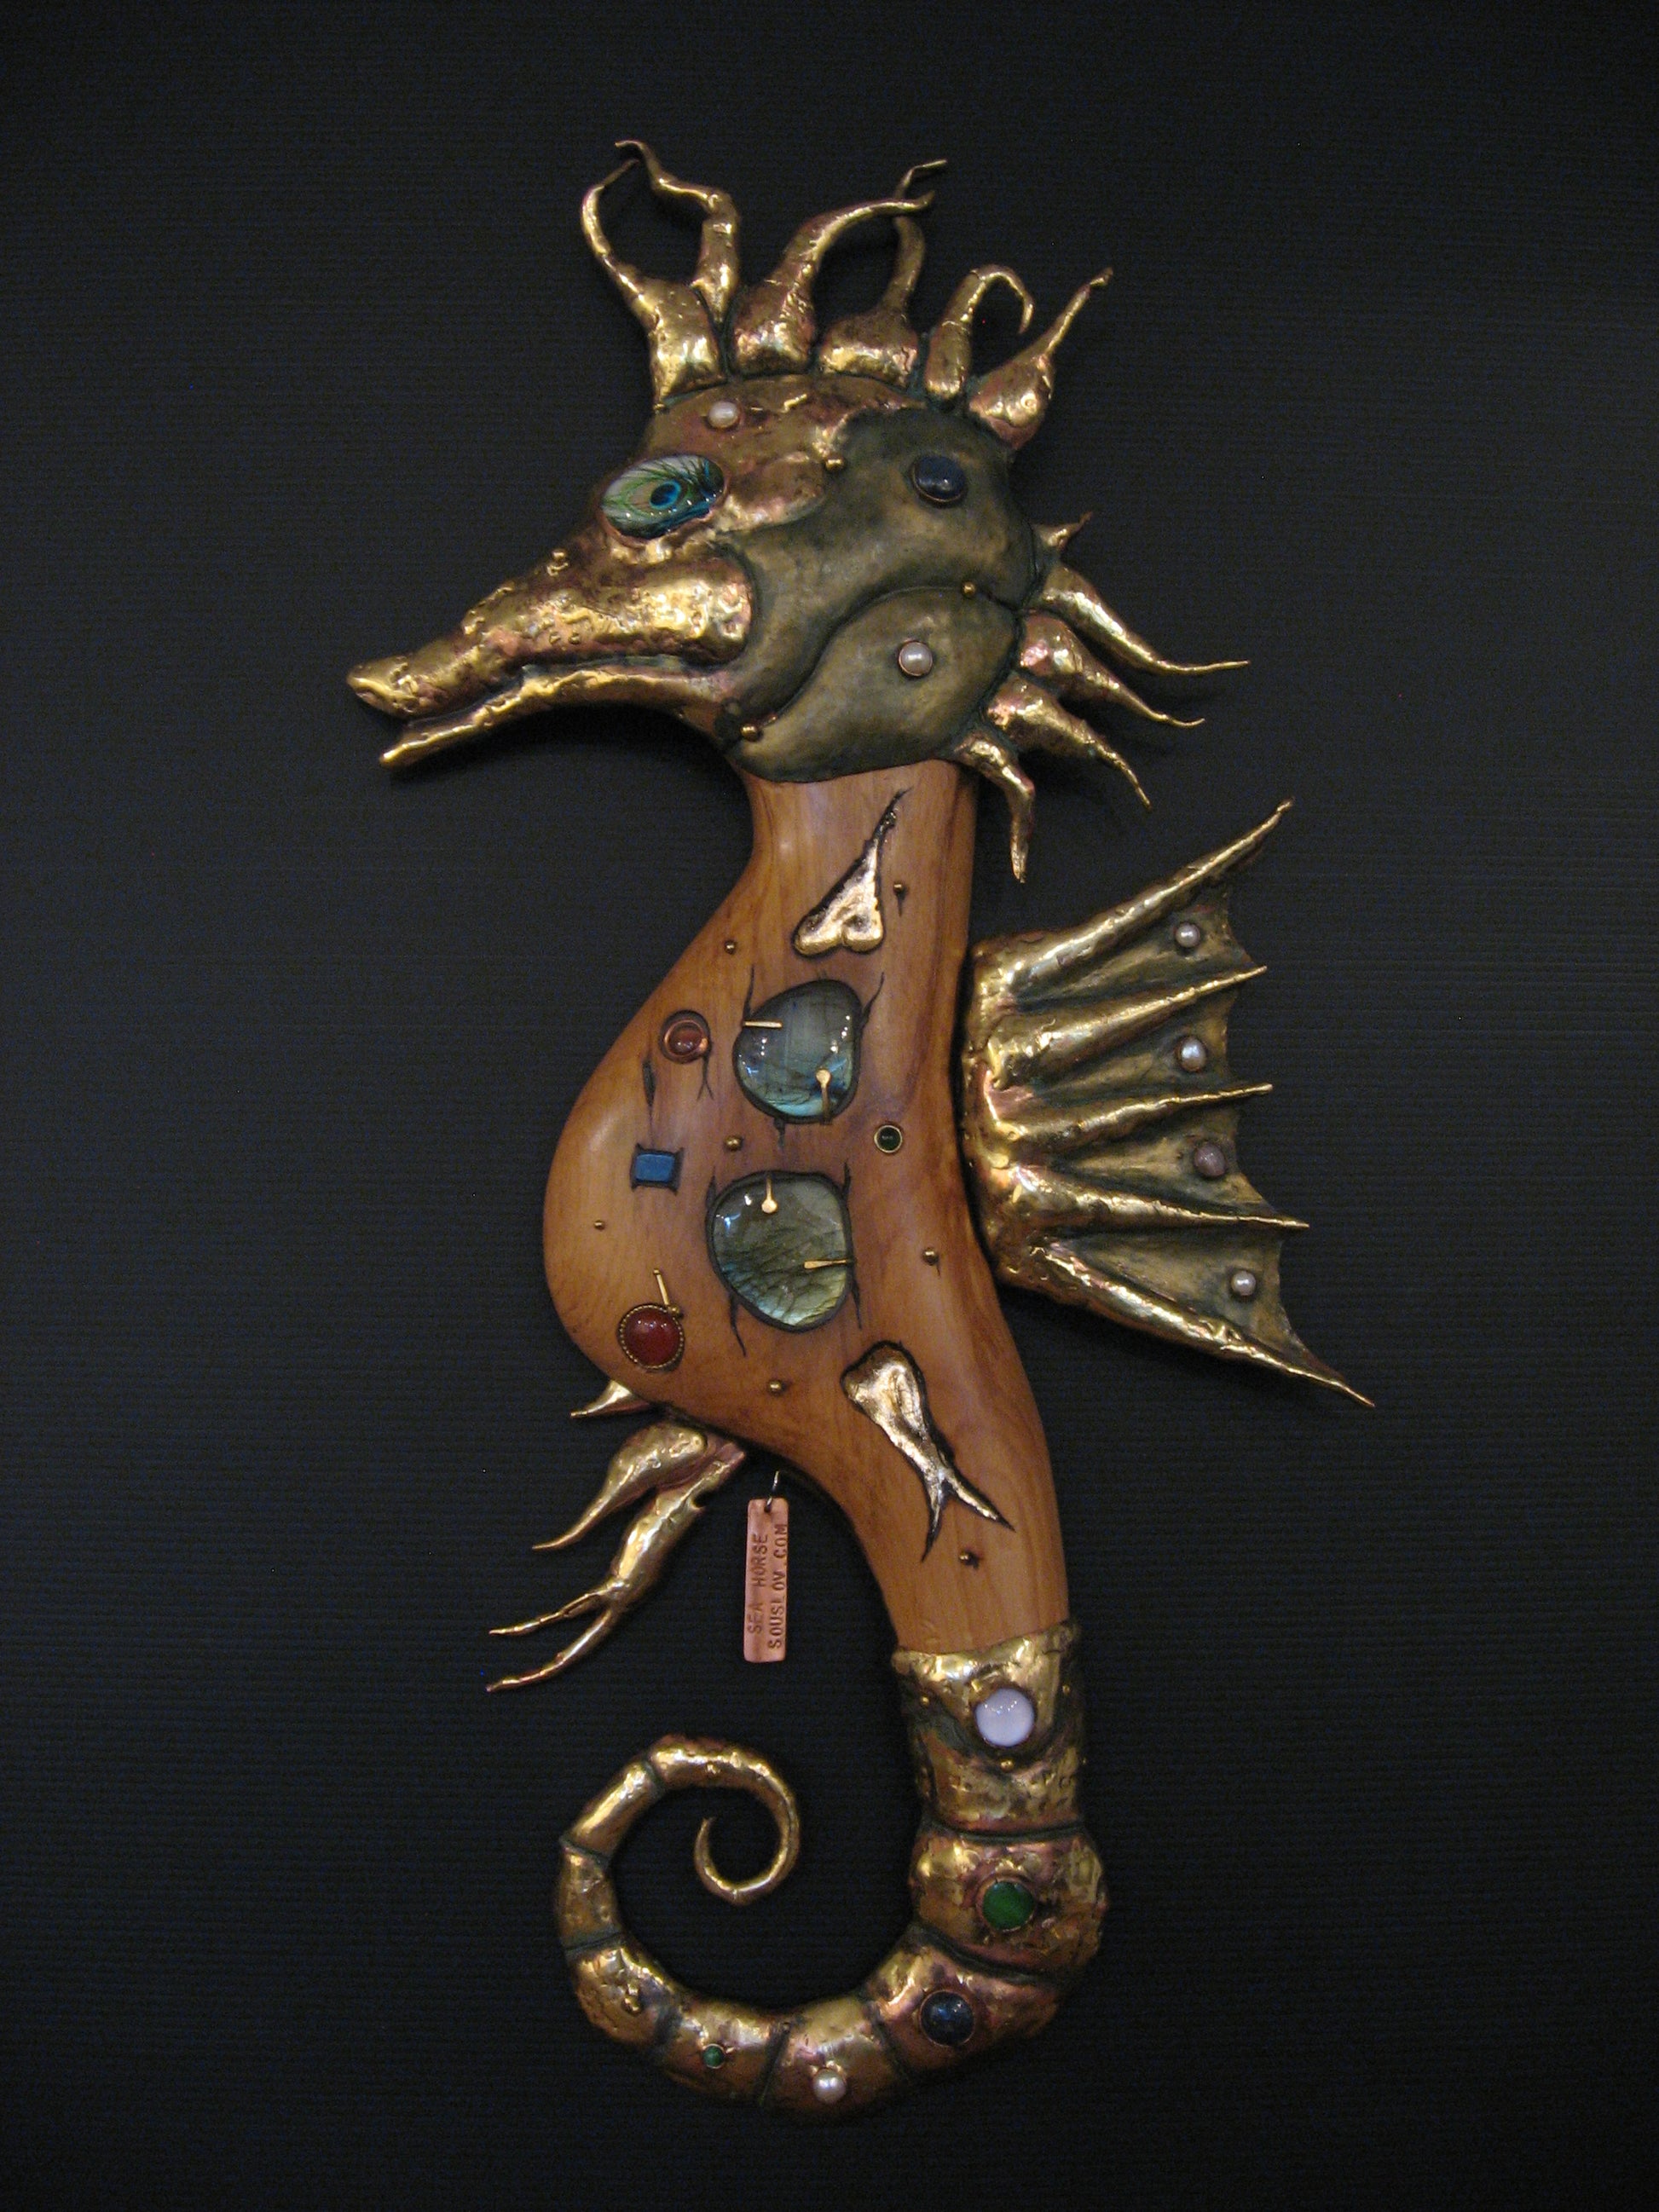 Seahorse Wall Art of Metal Wood and Gems by Serge Souslov Silver Fern Gallery